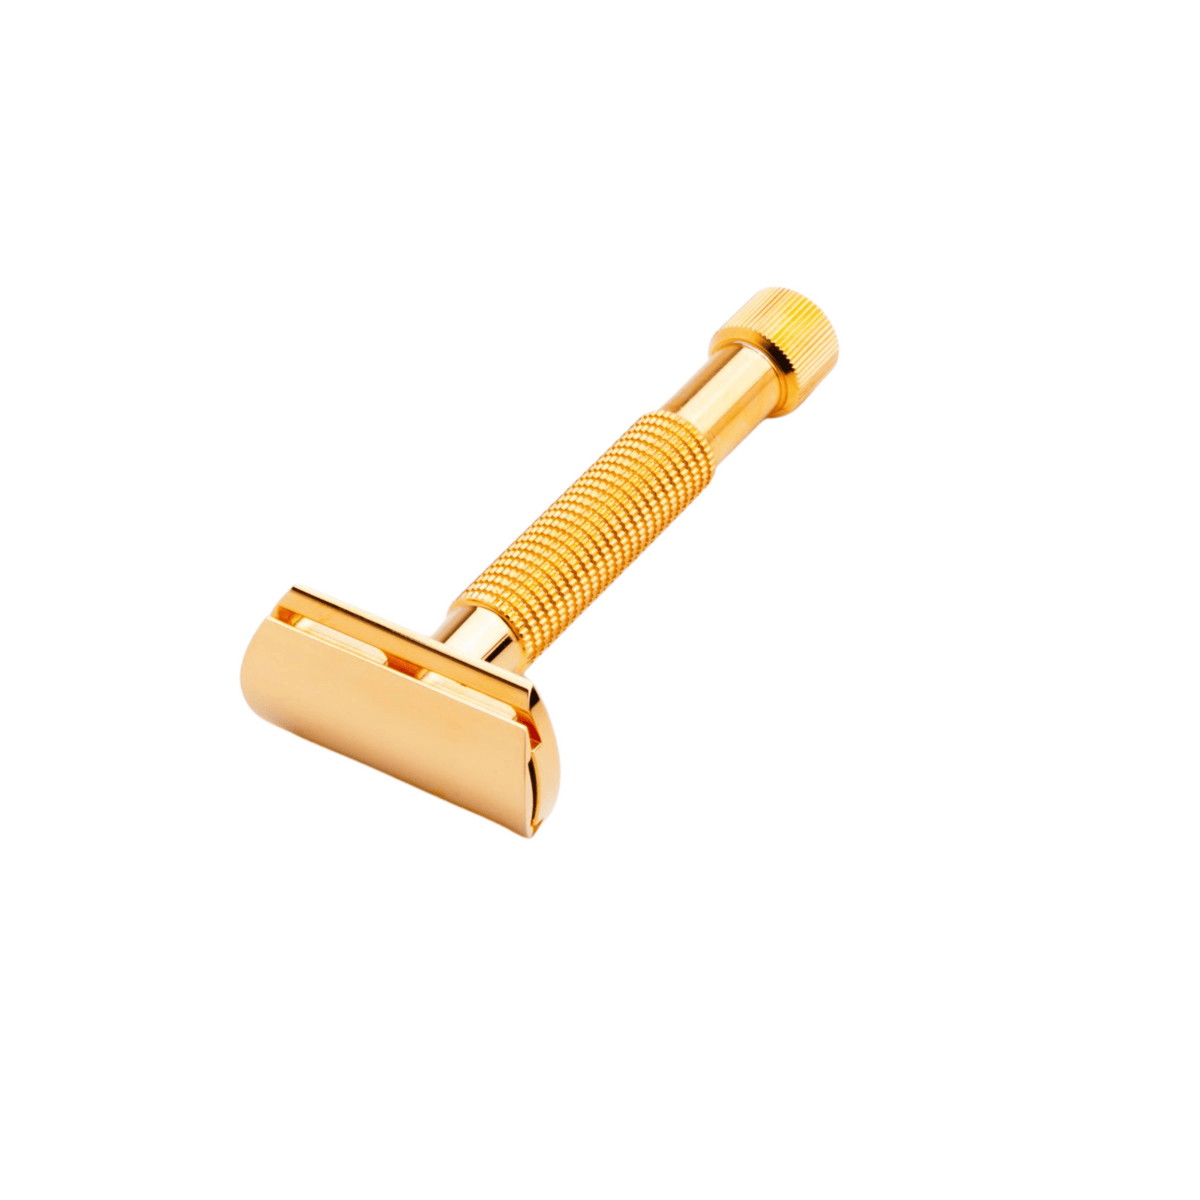 Primary Image of Envoy XL Deluxe Gold Safety Razor